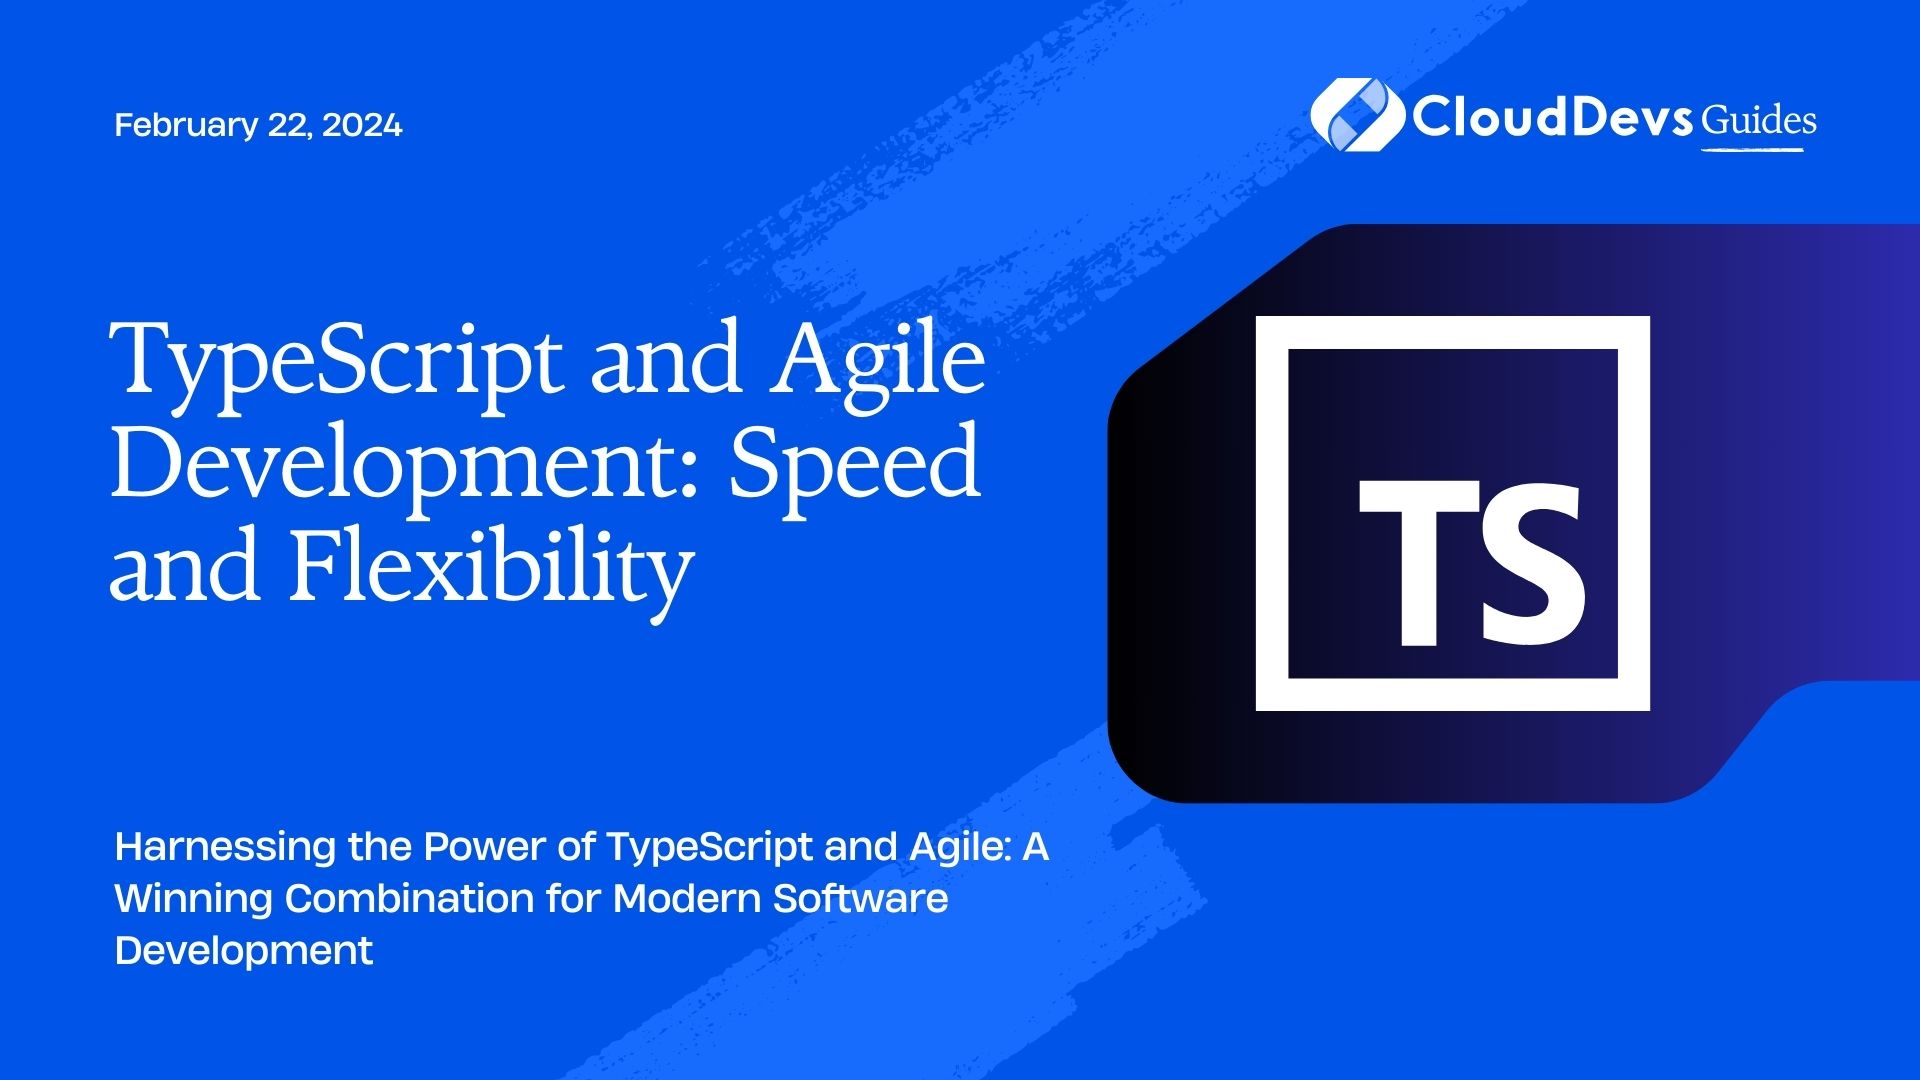 TypeScript and Agile Development: Speed and Flexibility